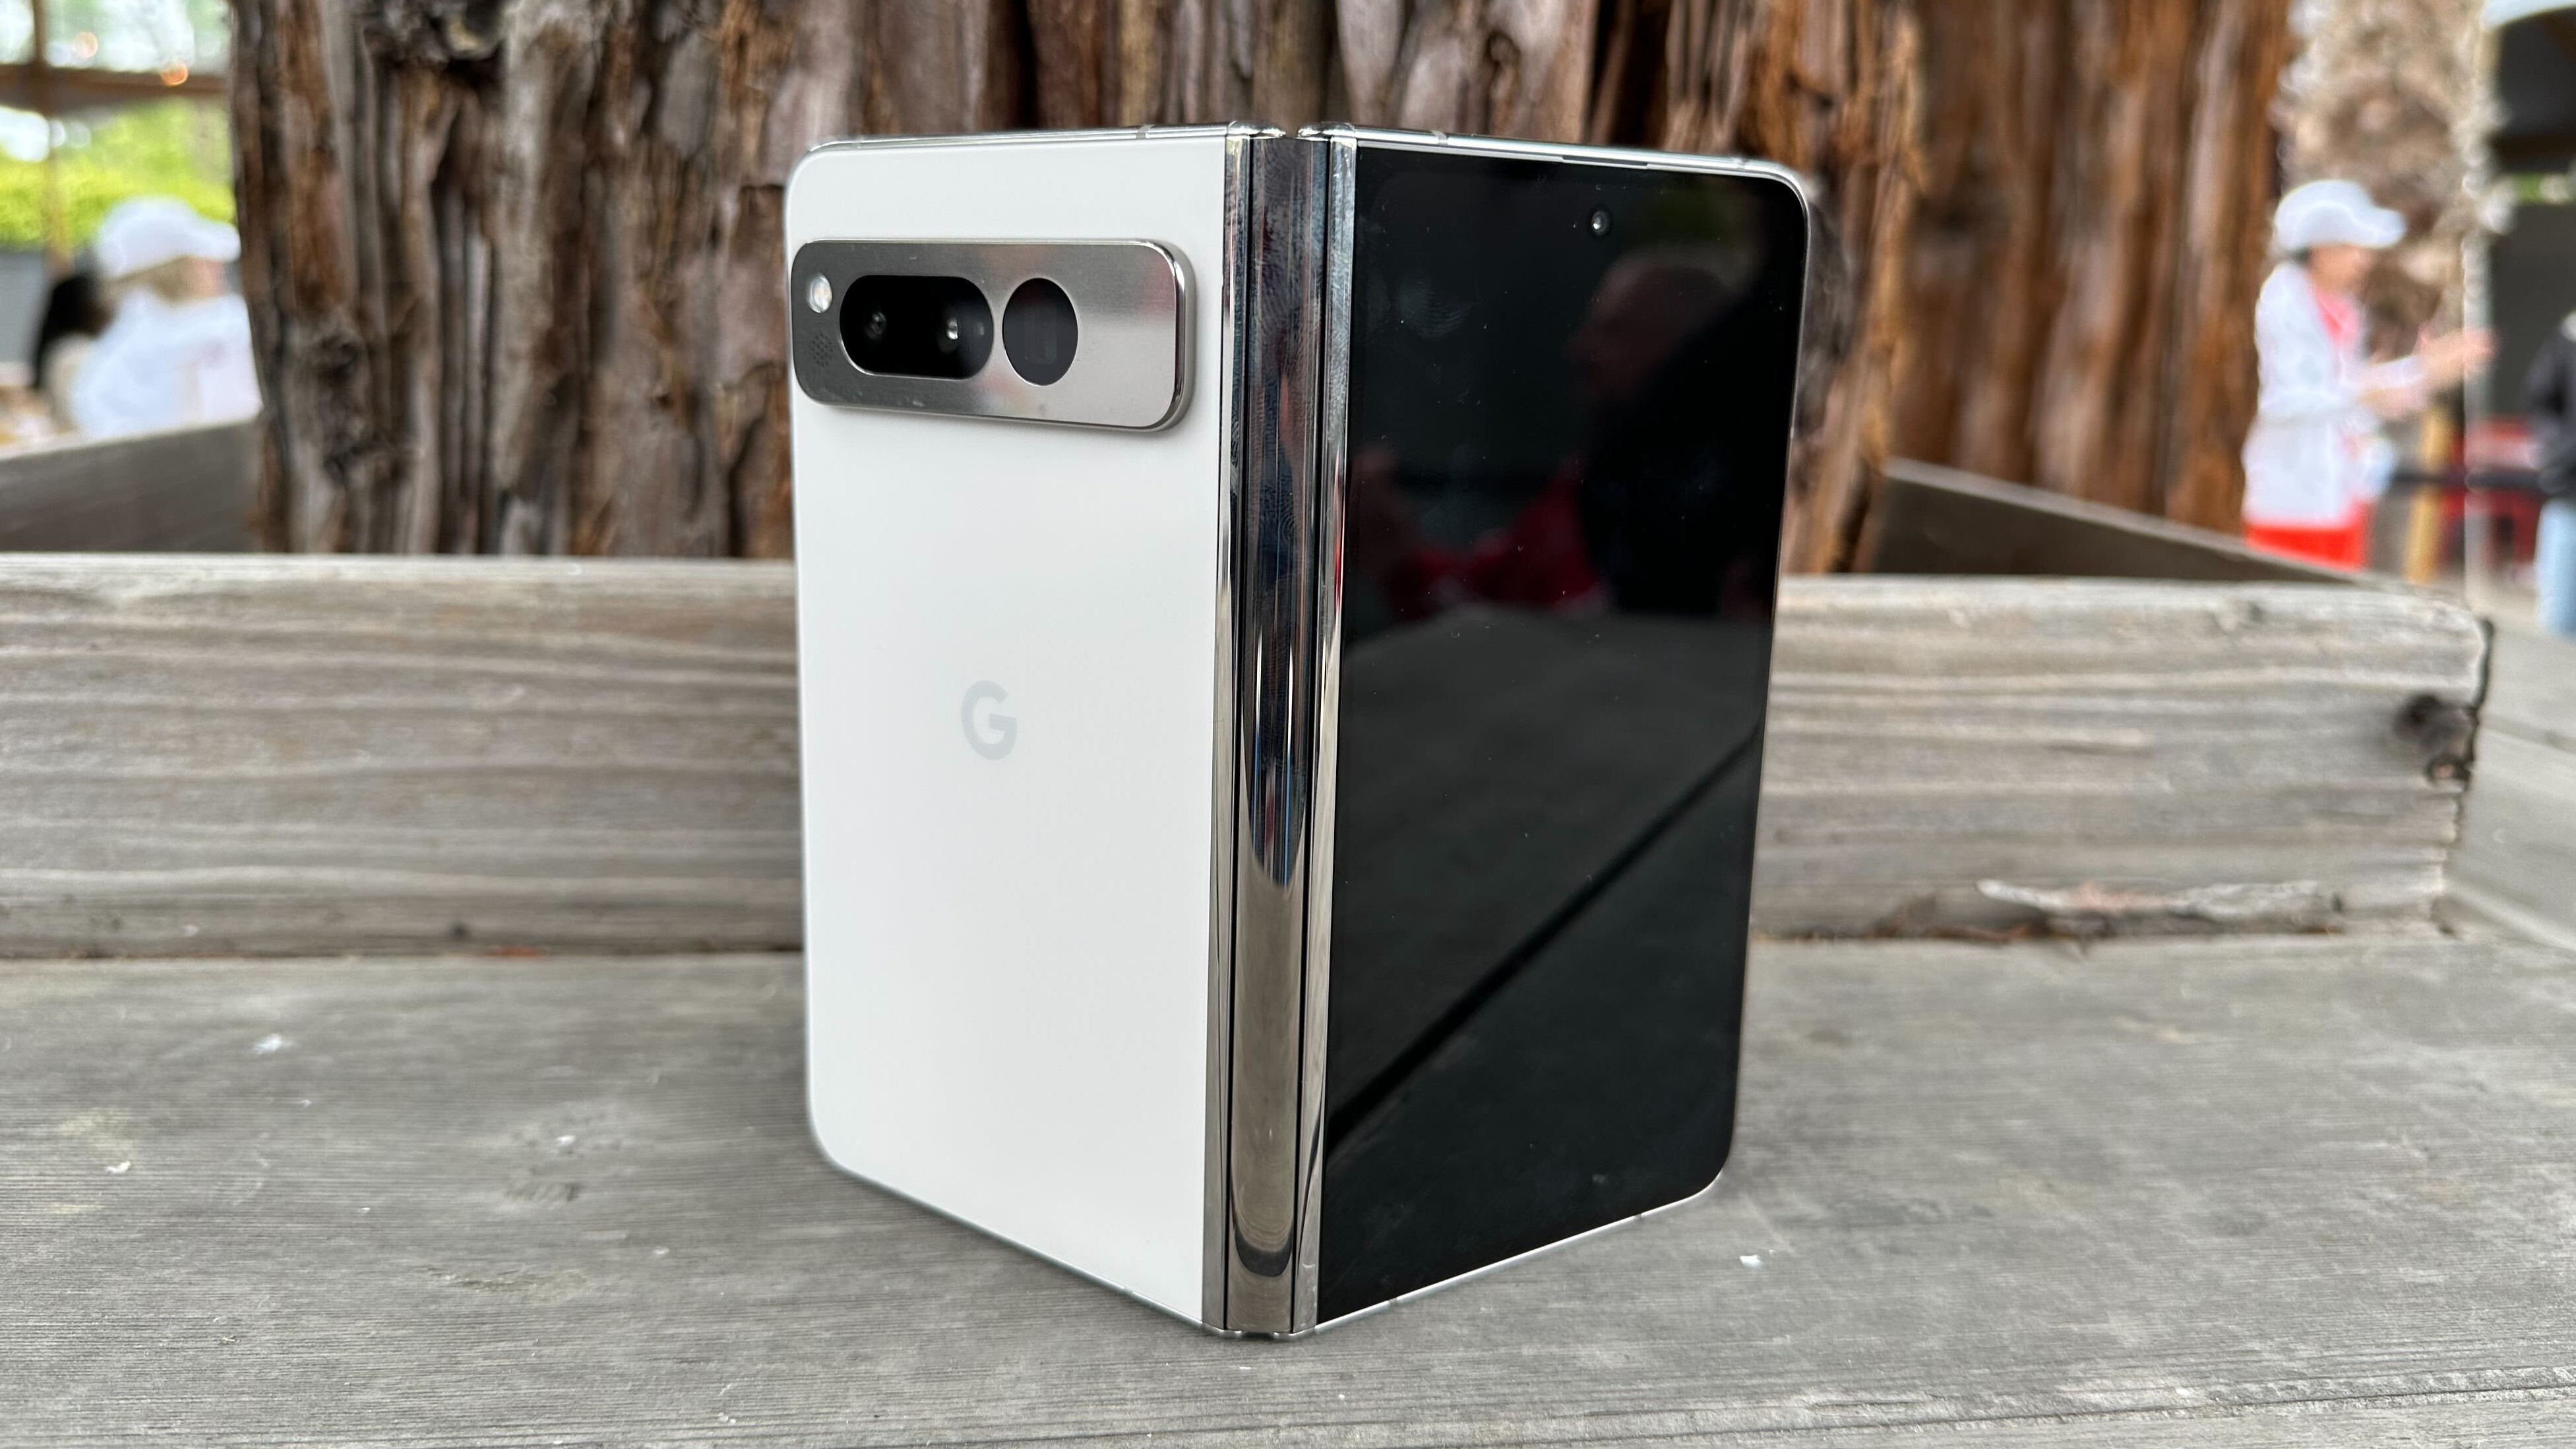 Google Pixel Fold in the Porcelain colorway outdoors.